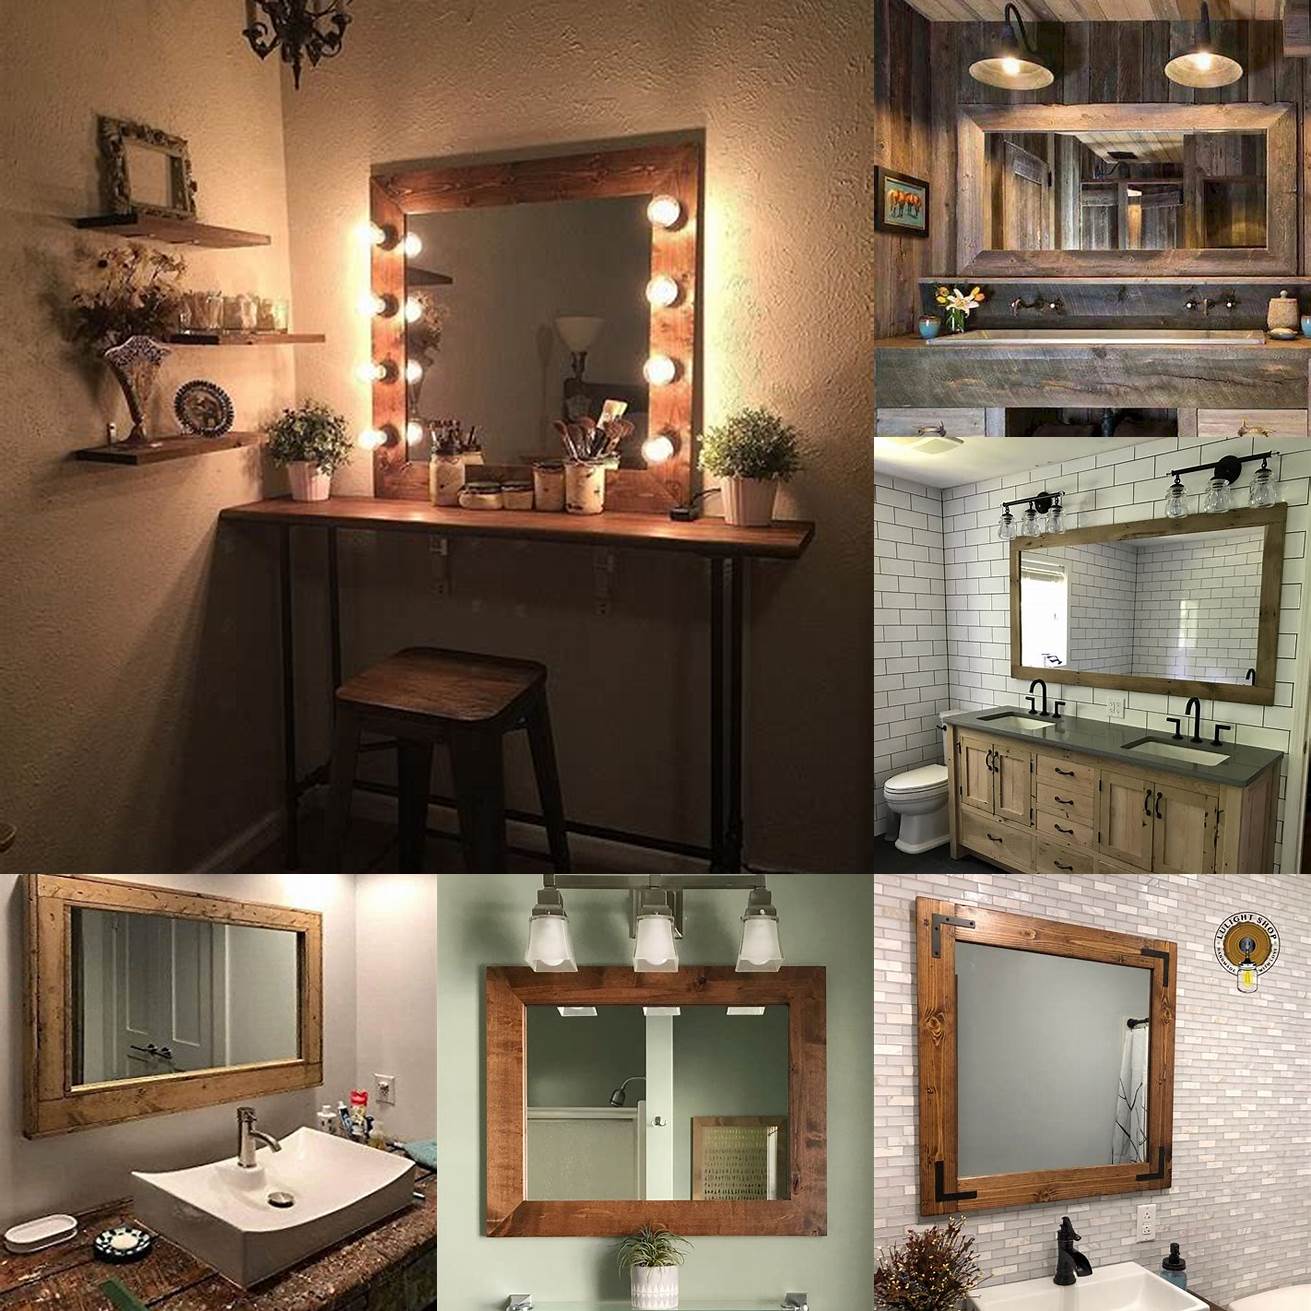 A rustic bathroom vanity with makeup station and a wooden mirror frame